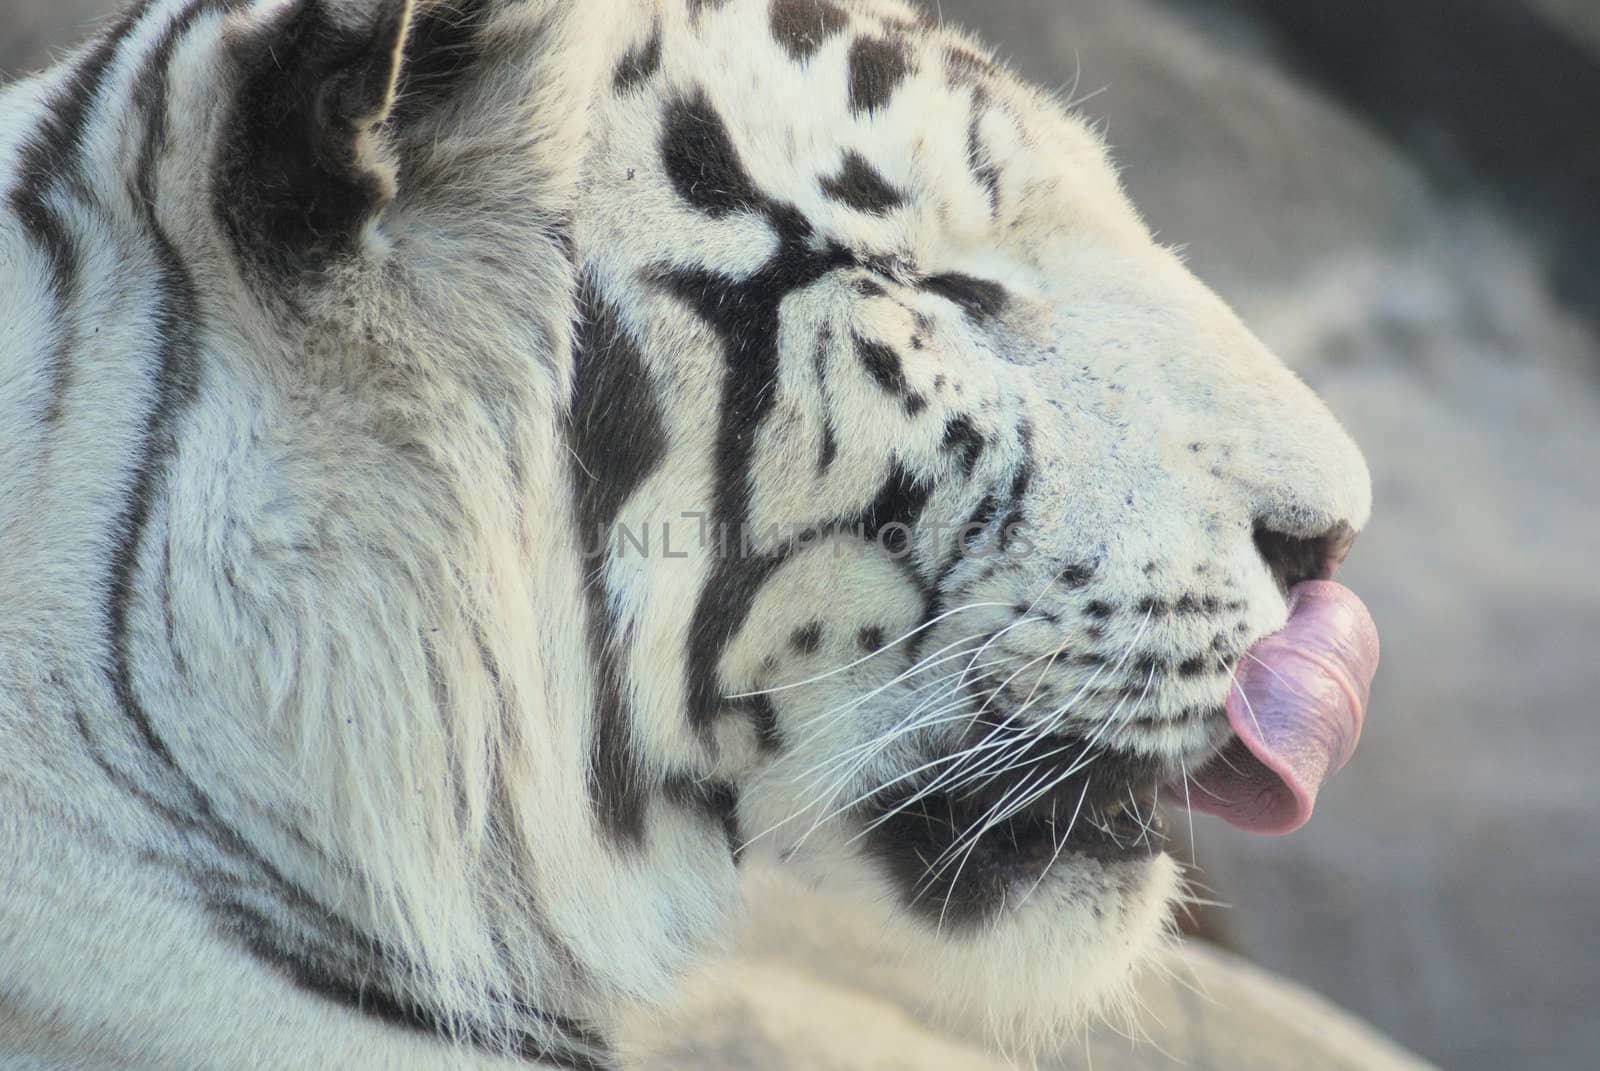 Bengal white tiger licking nose with tongue  by svtrotof